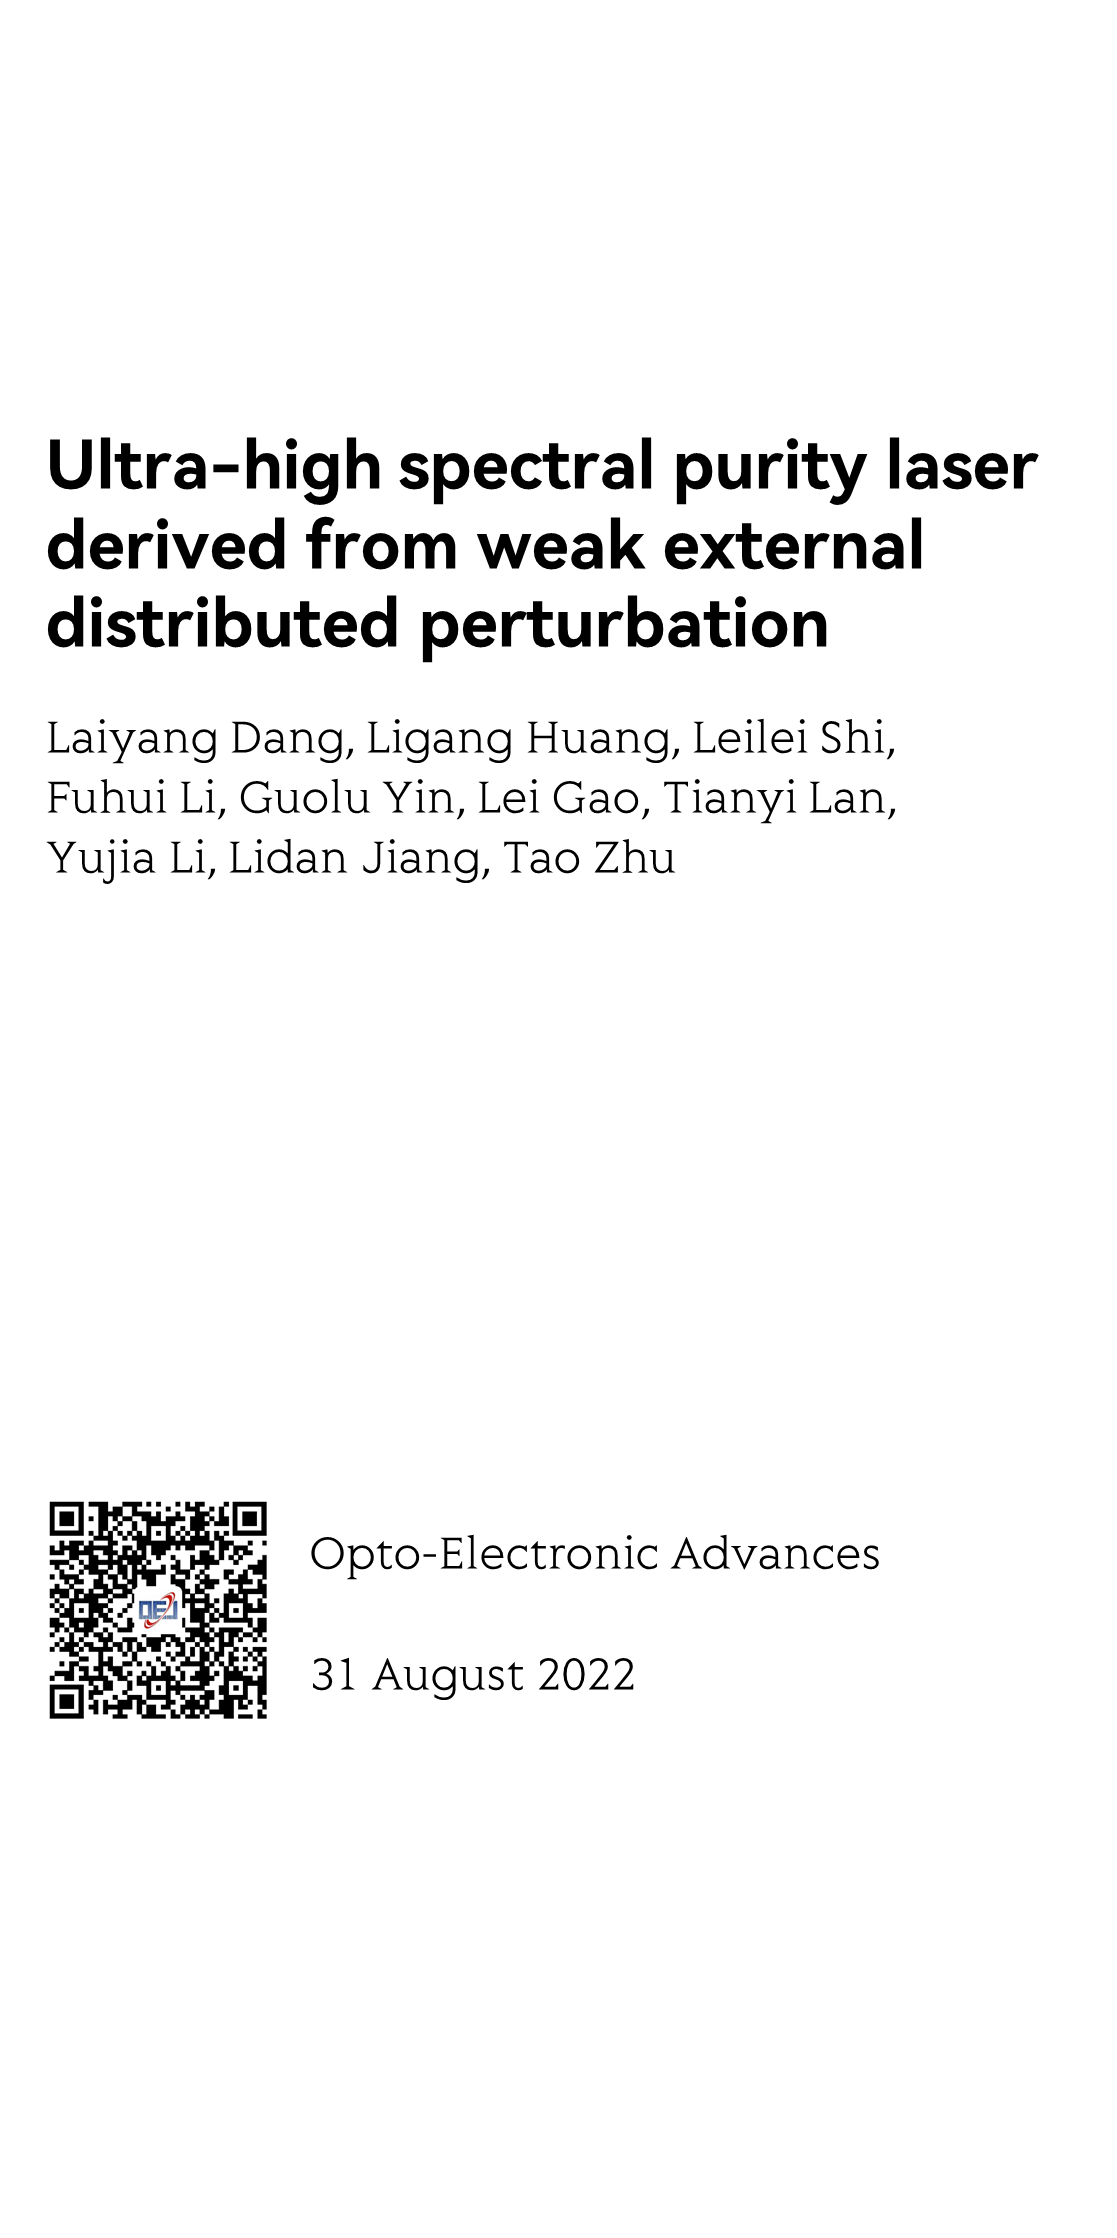 Ultra-high spectral purity laser derived from weak external distributed perturbation_1